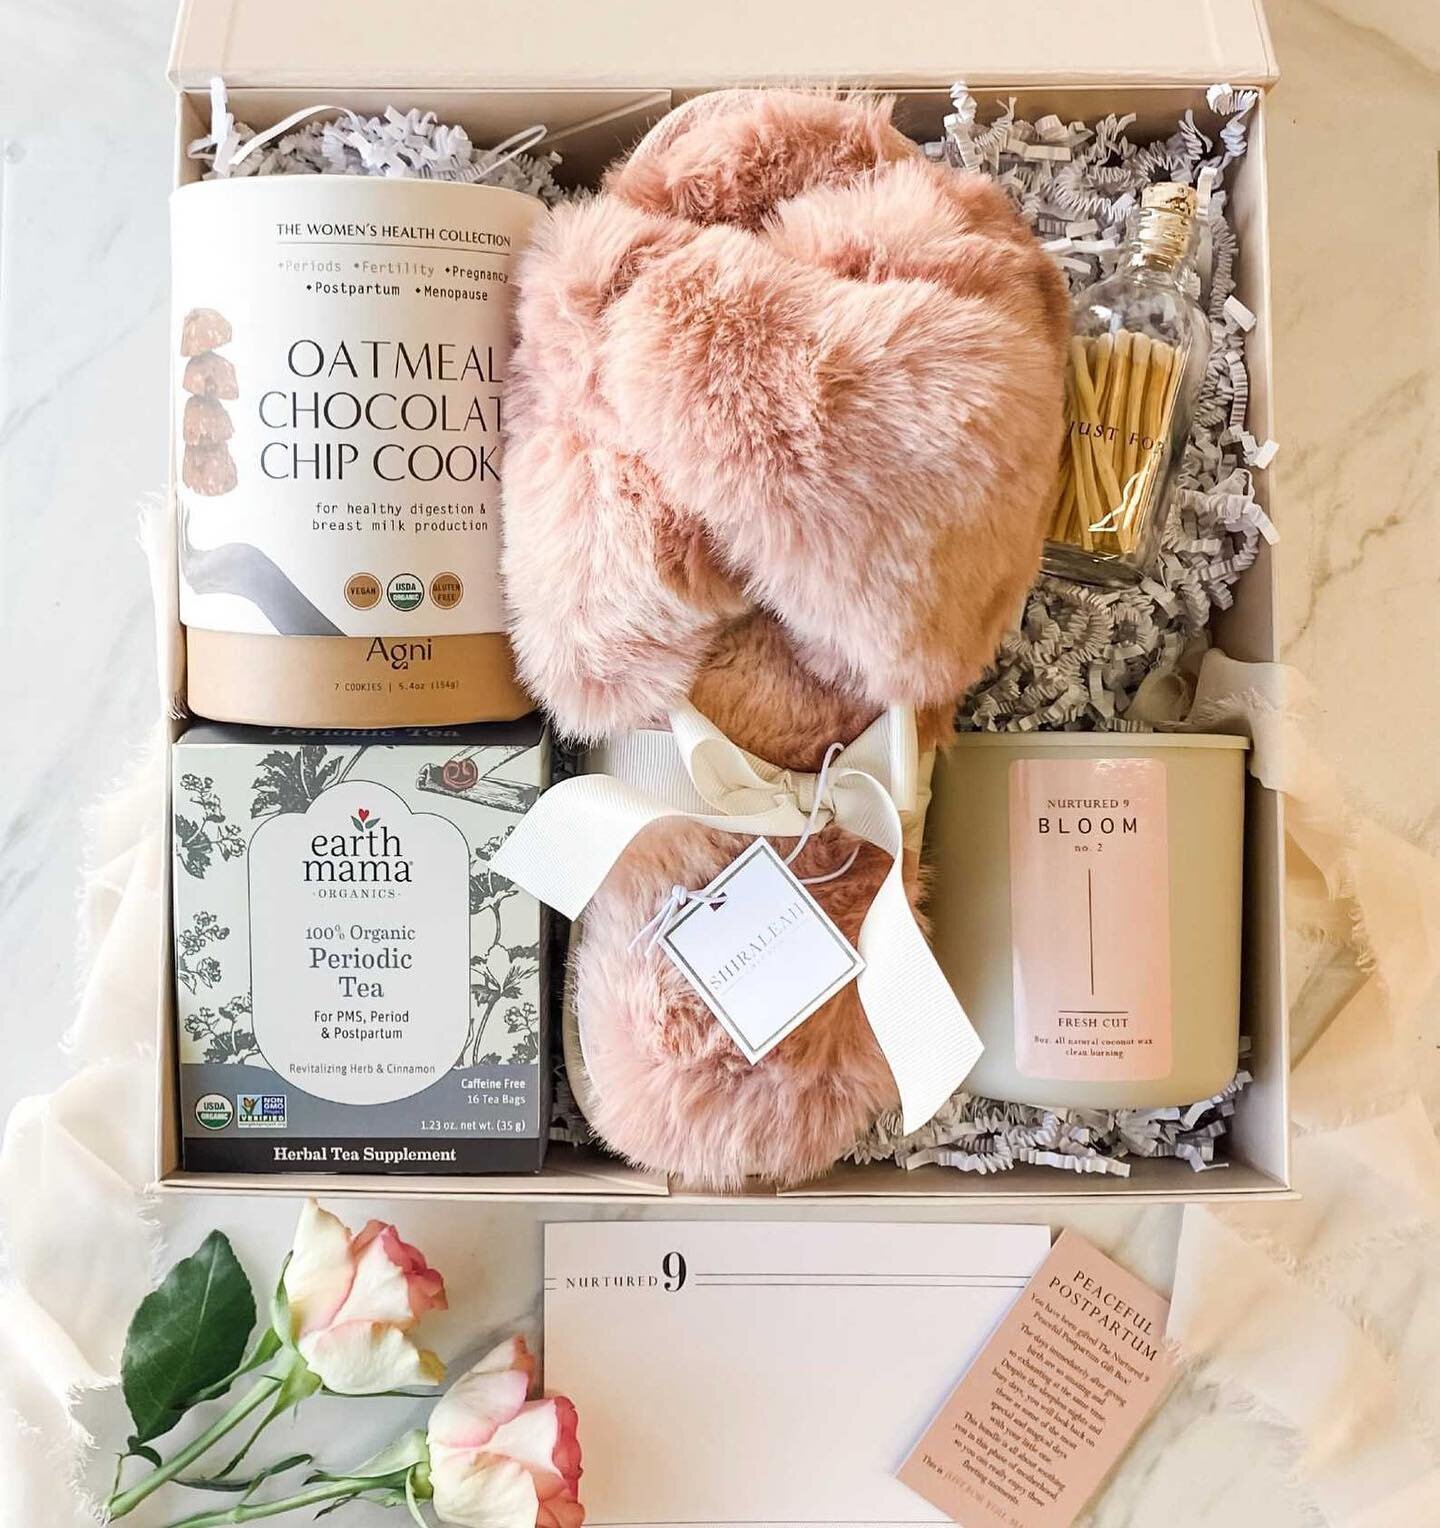 The name of our bestselling gift box says it all: Peaceful Postpartum.
⠀⠀⠀⠀⠀⠀⠀⠀⠀
What more could we want for the special new Mama in our lives? She&rsquo;s been through a long pregnancy and perhaps a challenging labor &amp; delivery. She&rsquo;s batt